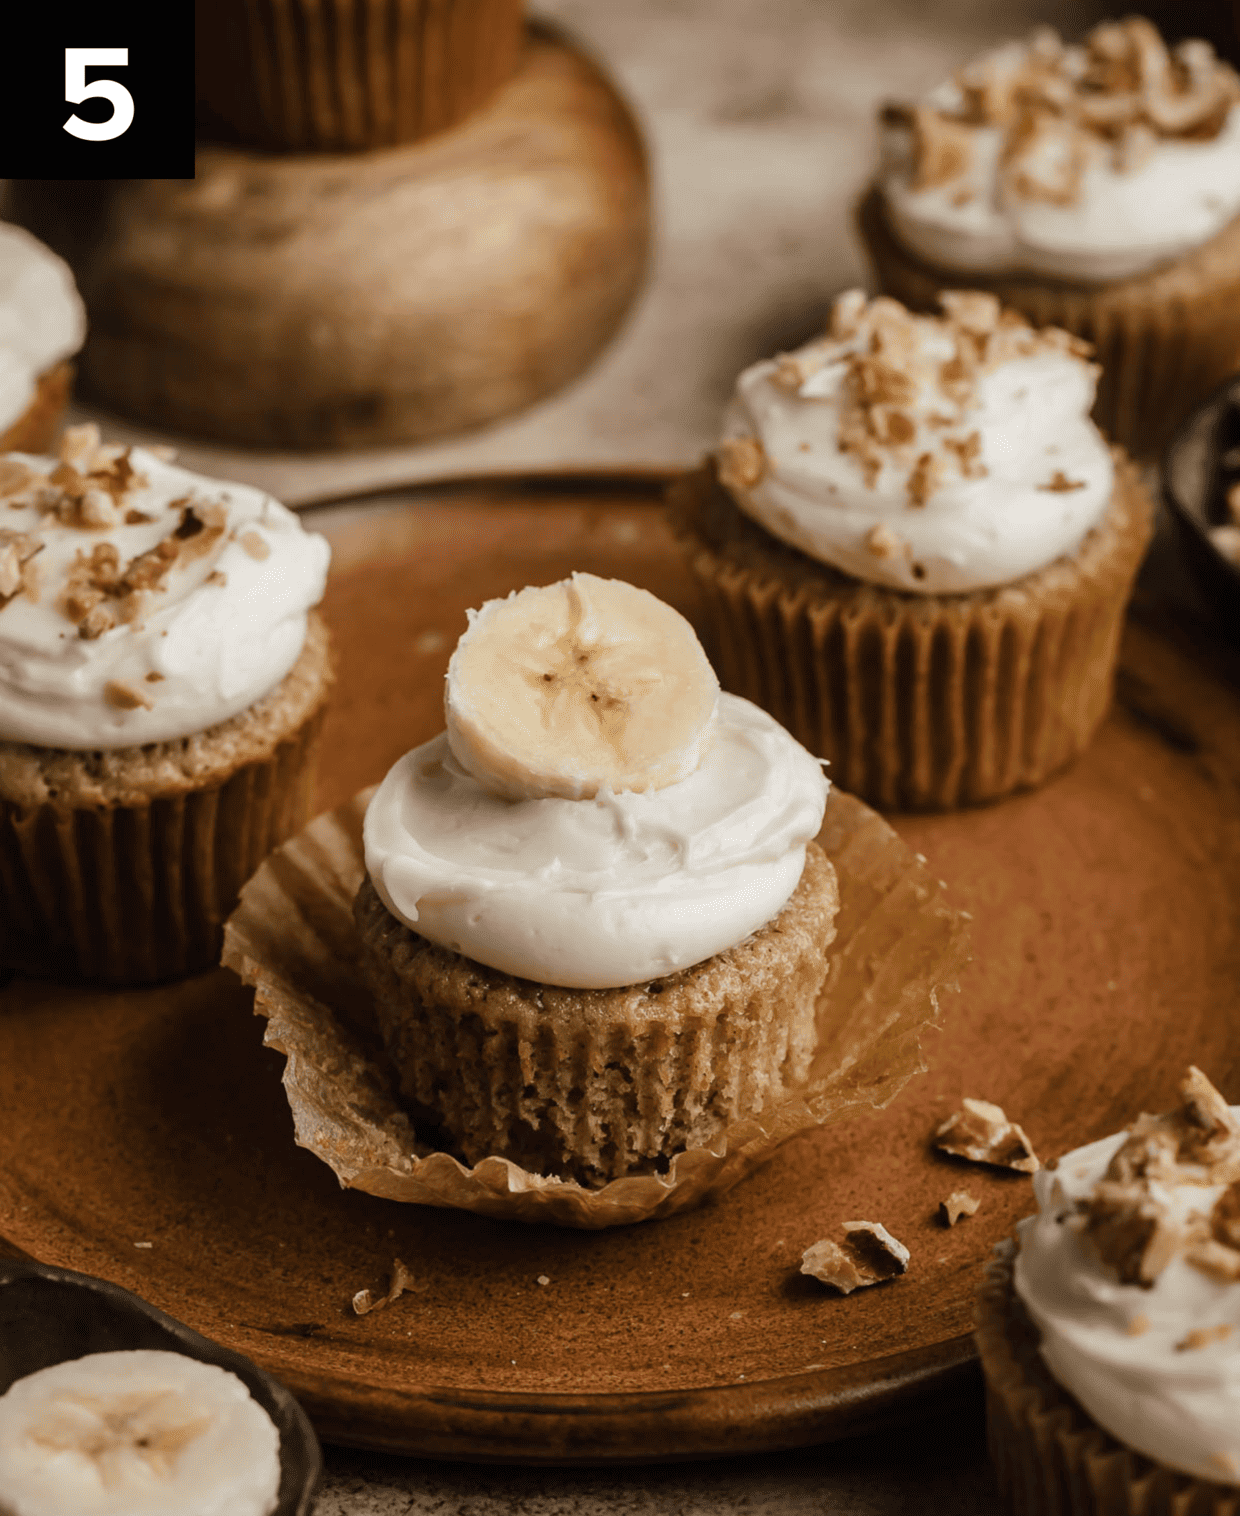 A banana cupcake topped with white cream cheese frosting with a fresh banana slice on top, the cupcake is on a brown plate.